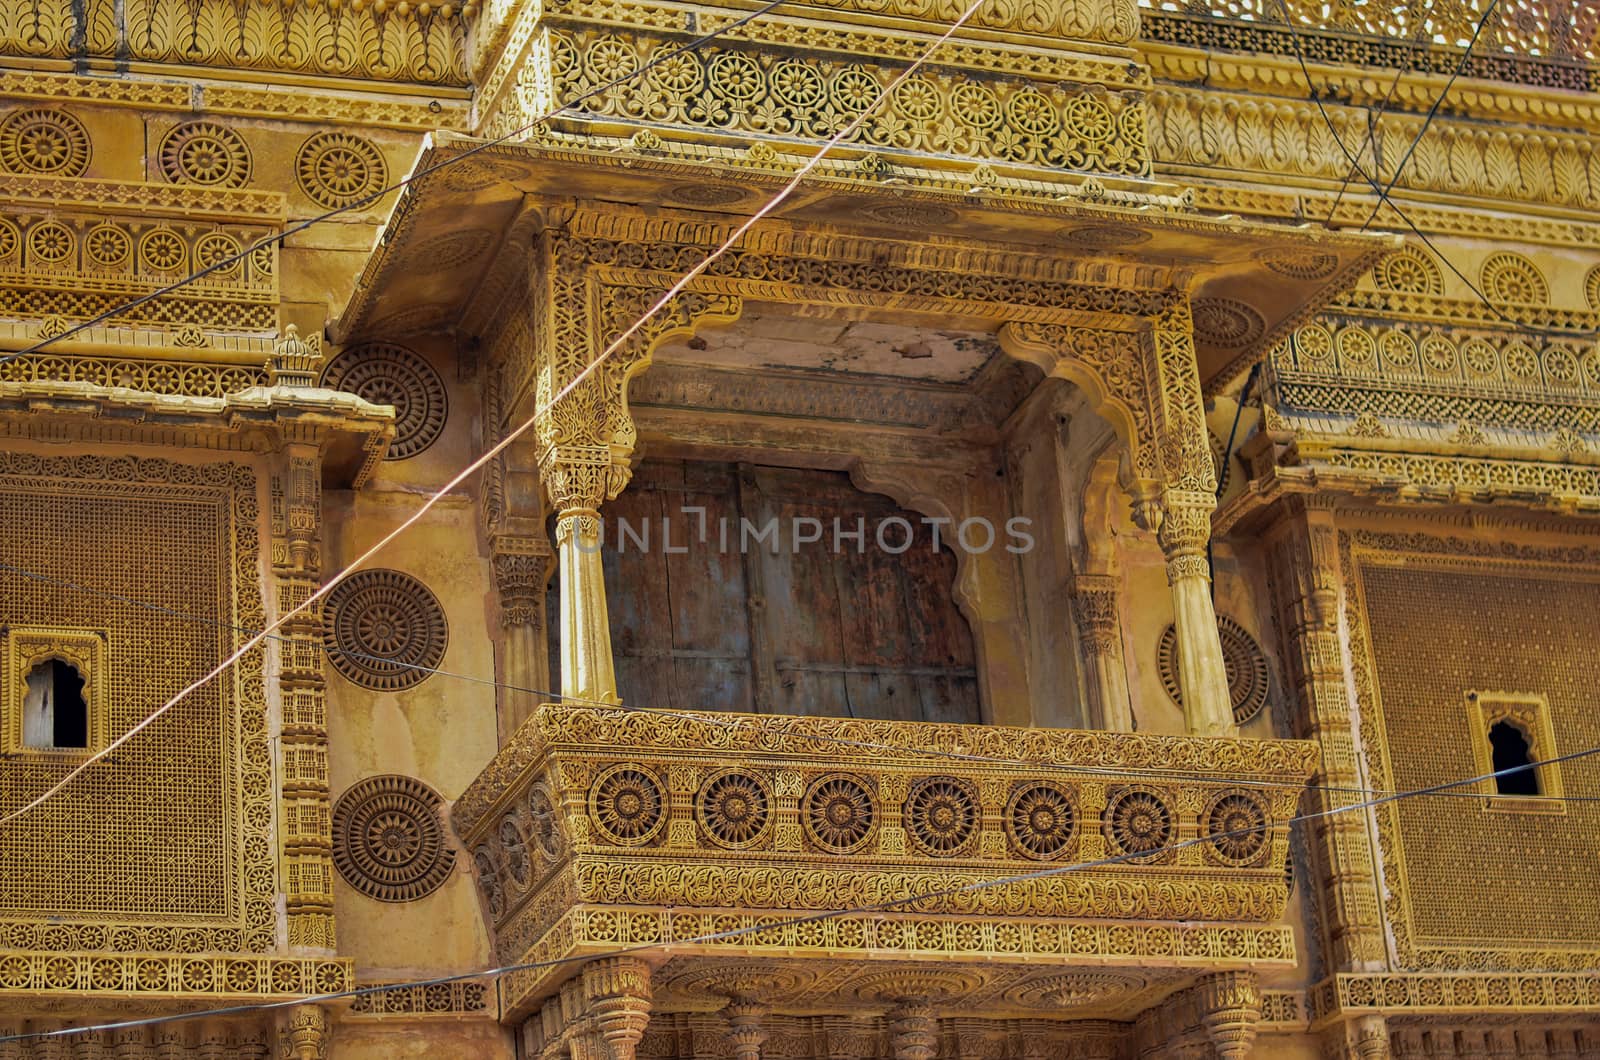 Traditional Rajasthani haveli with a decorated window at Patwon ki haveli in Jaisalmer, Rajasthan, India. Series of early-1800s palaces, now a museum featuring intricate carvings, furniture & artwork.